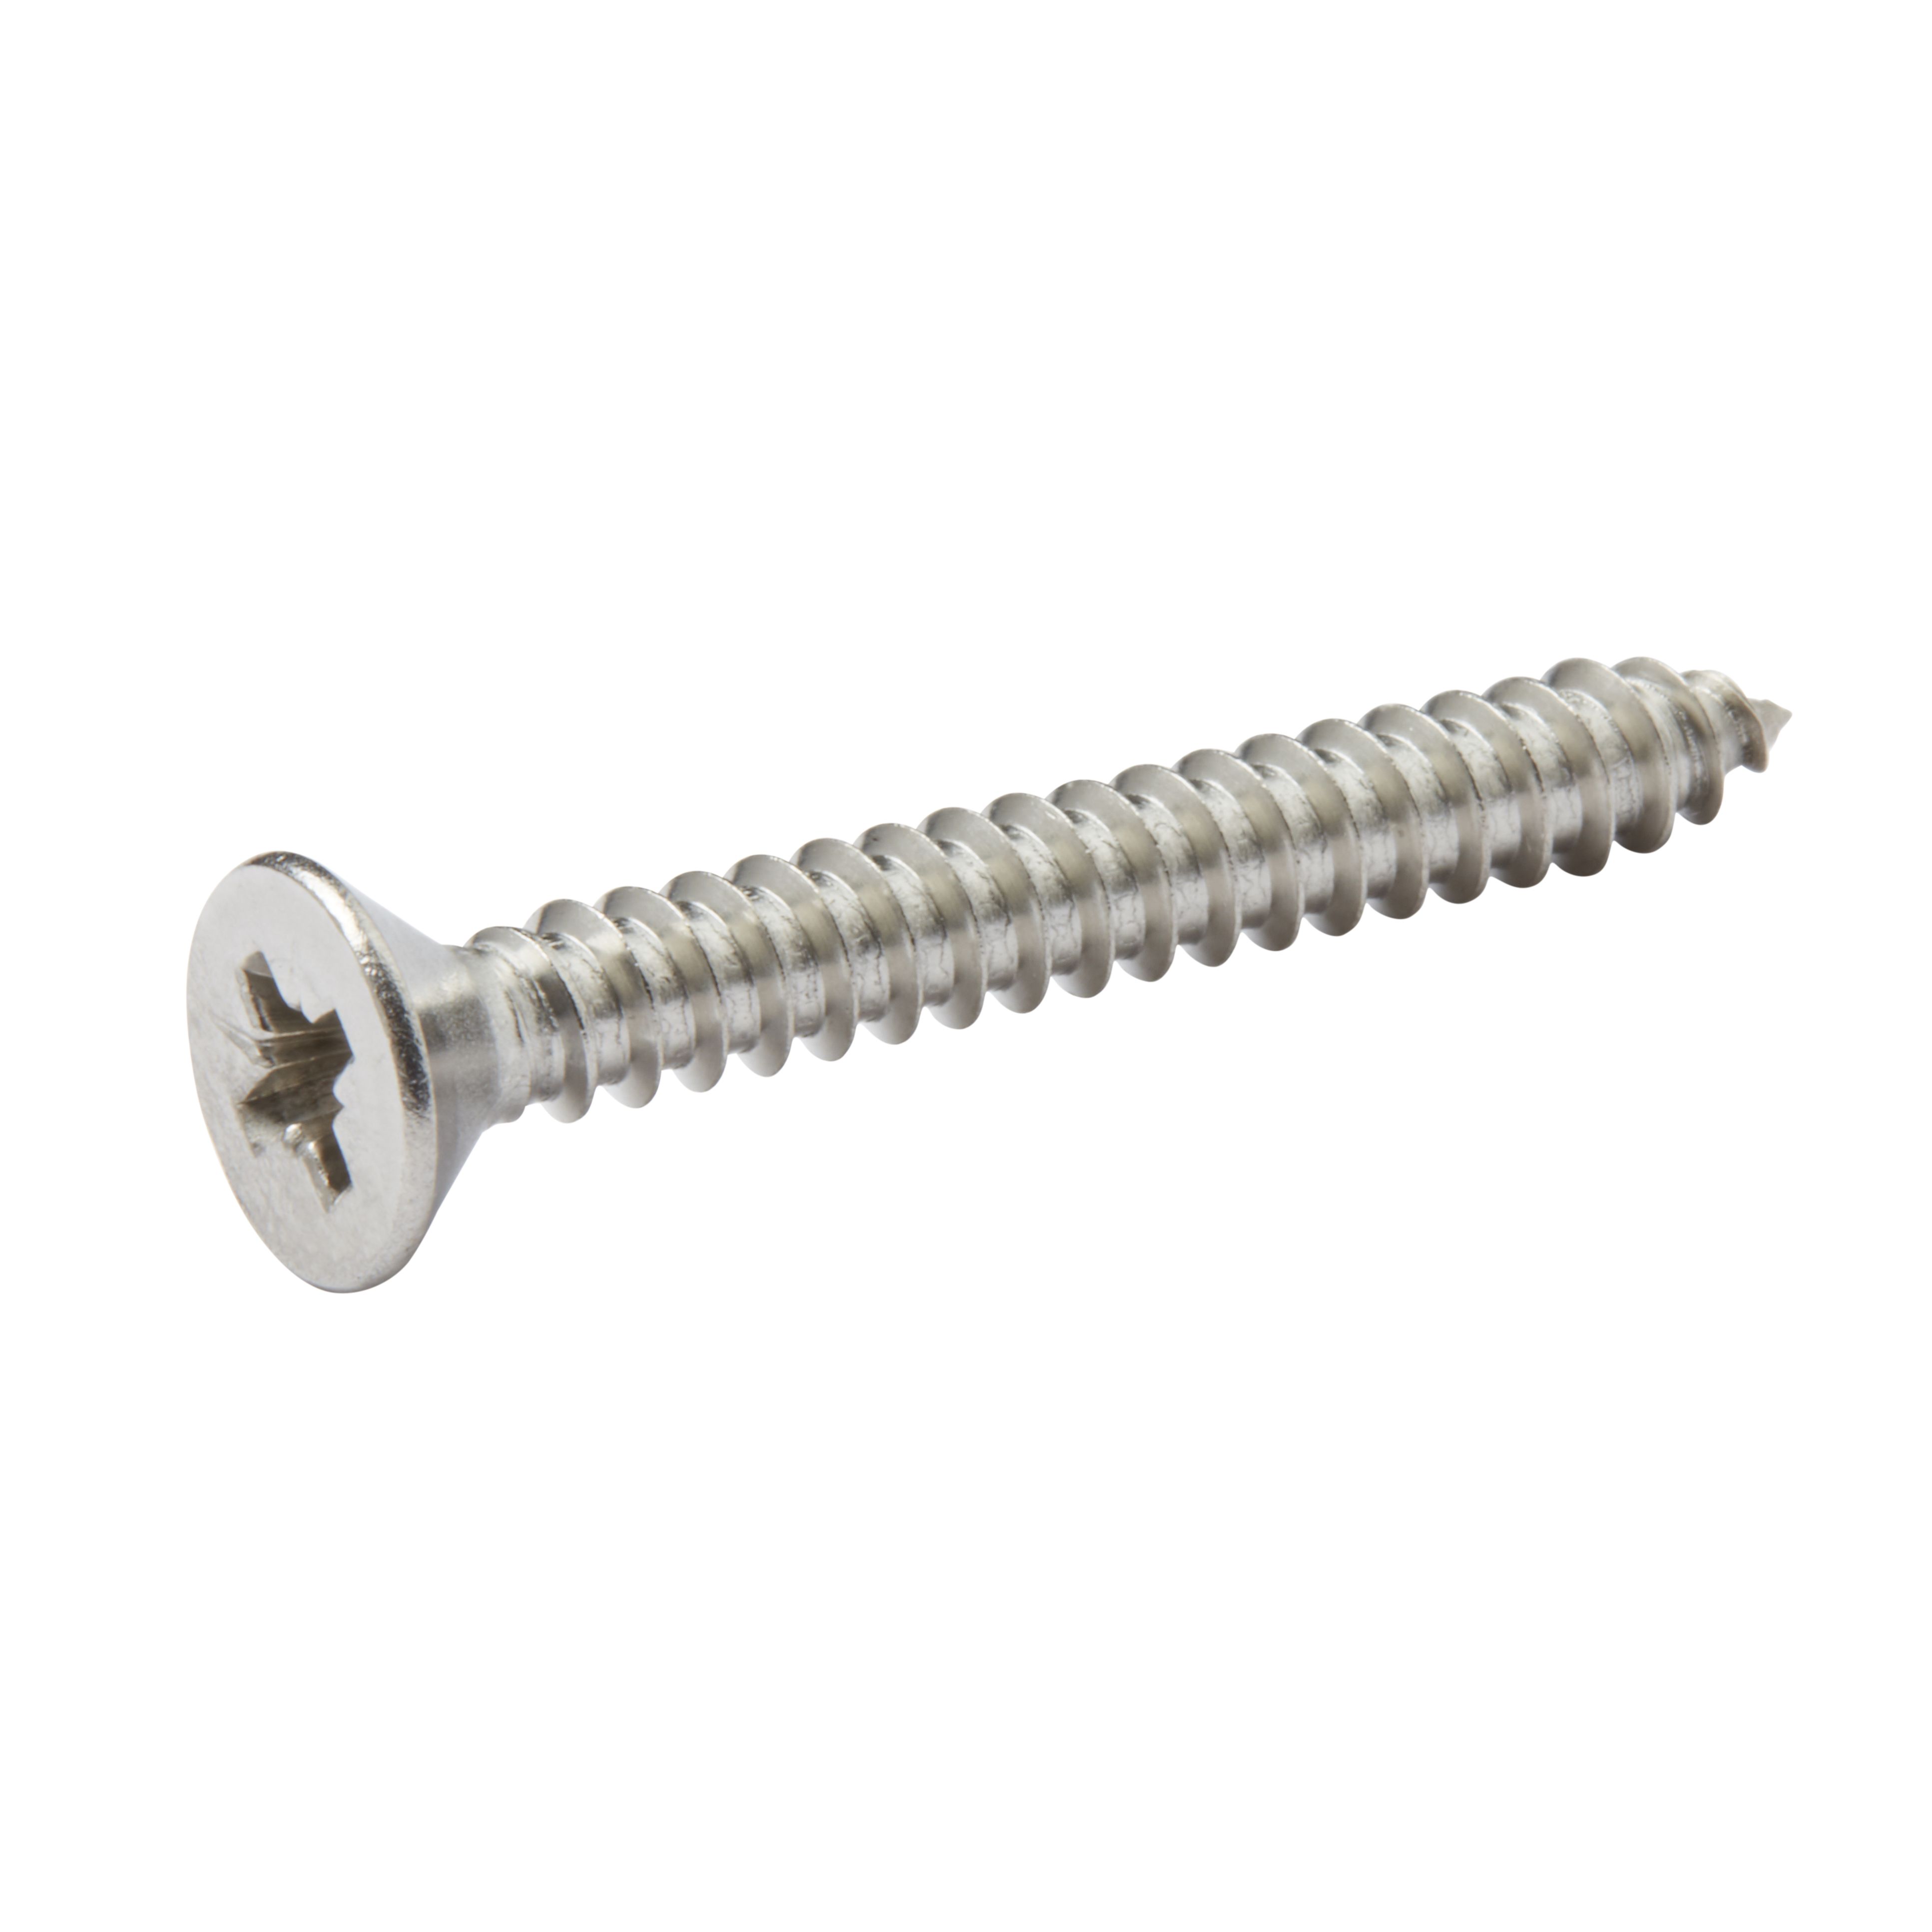 Diall Pozidriv Pan head Stainless steel Screw (Dia)4.8mm (L)38mm, Pack of 25